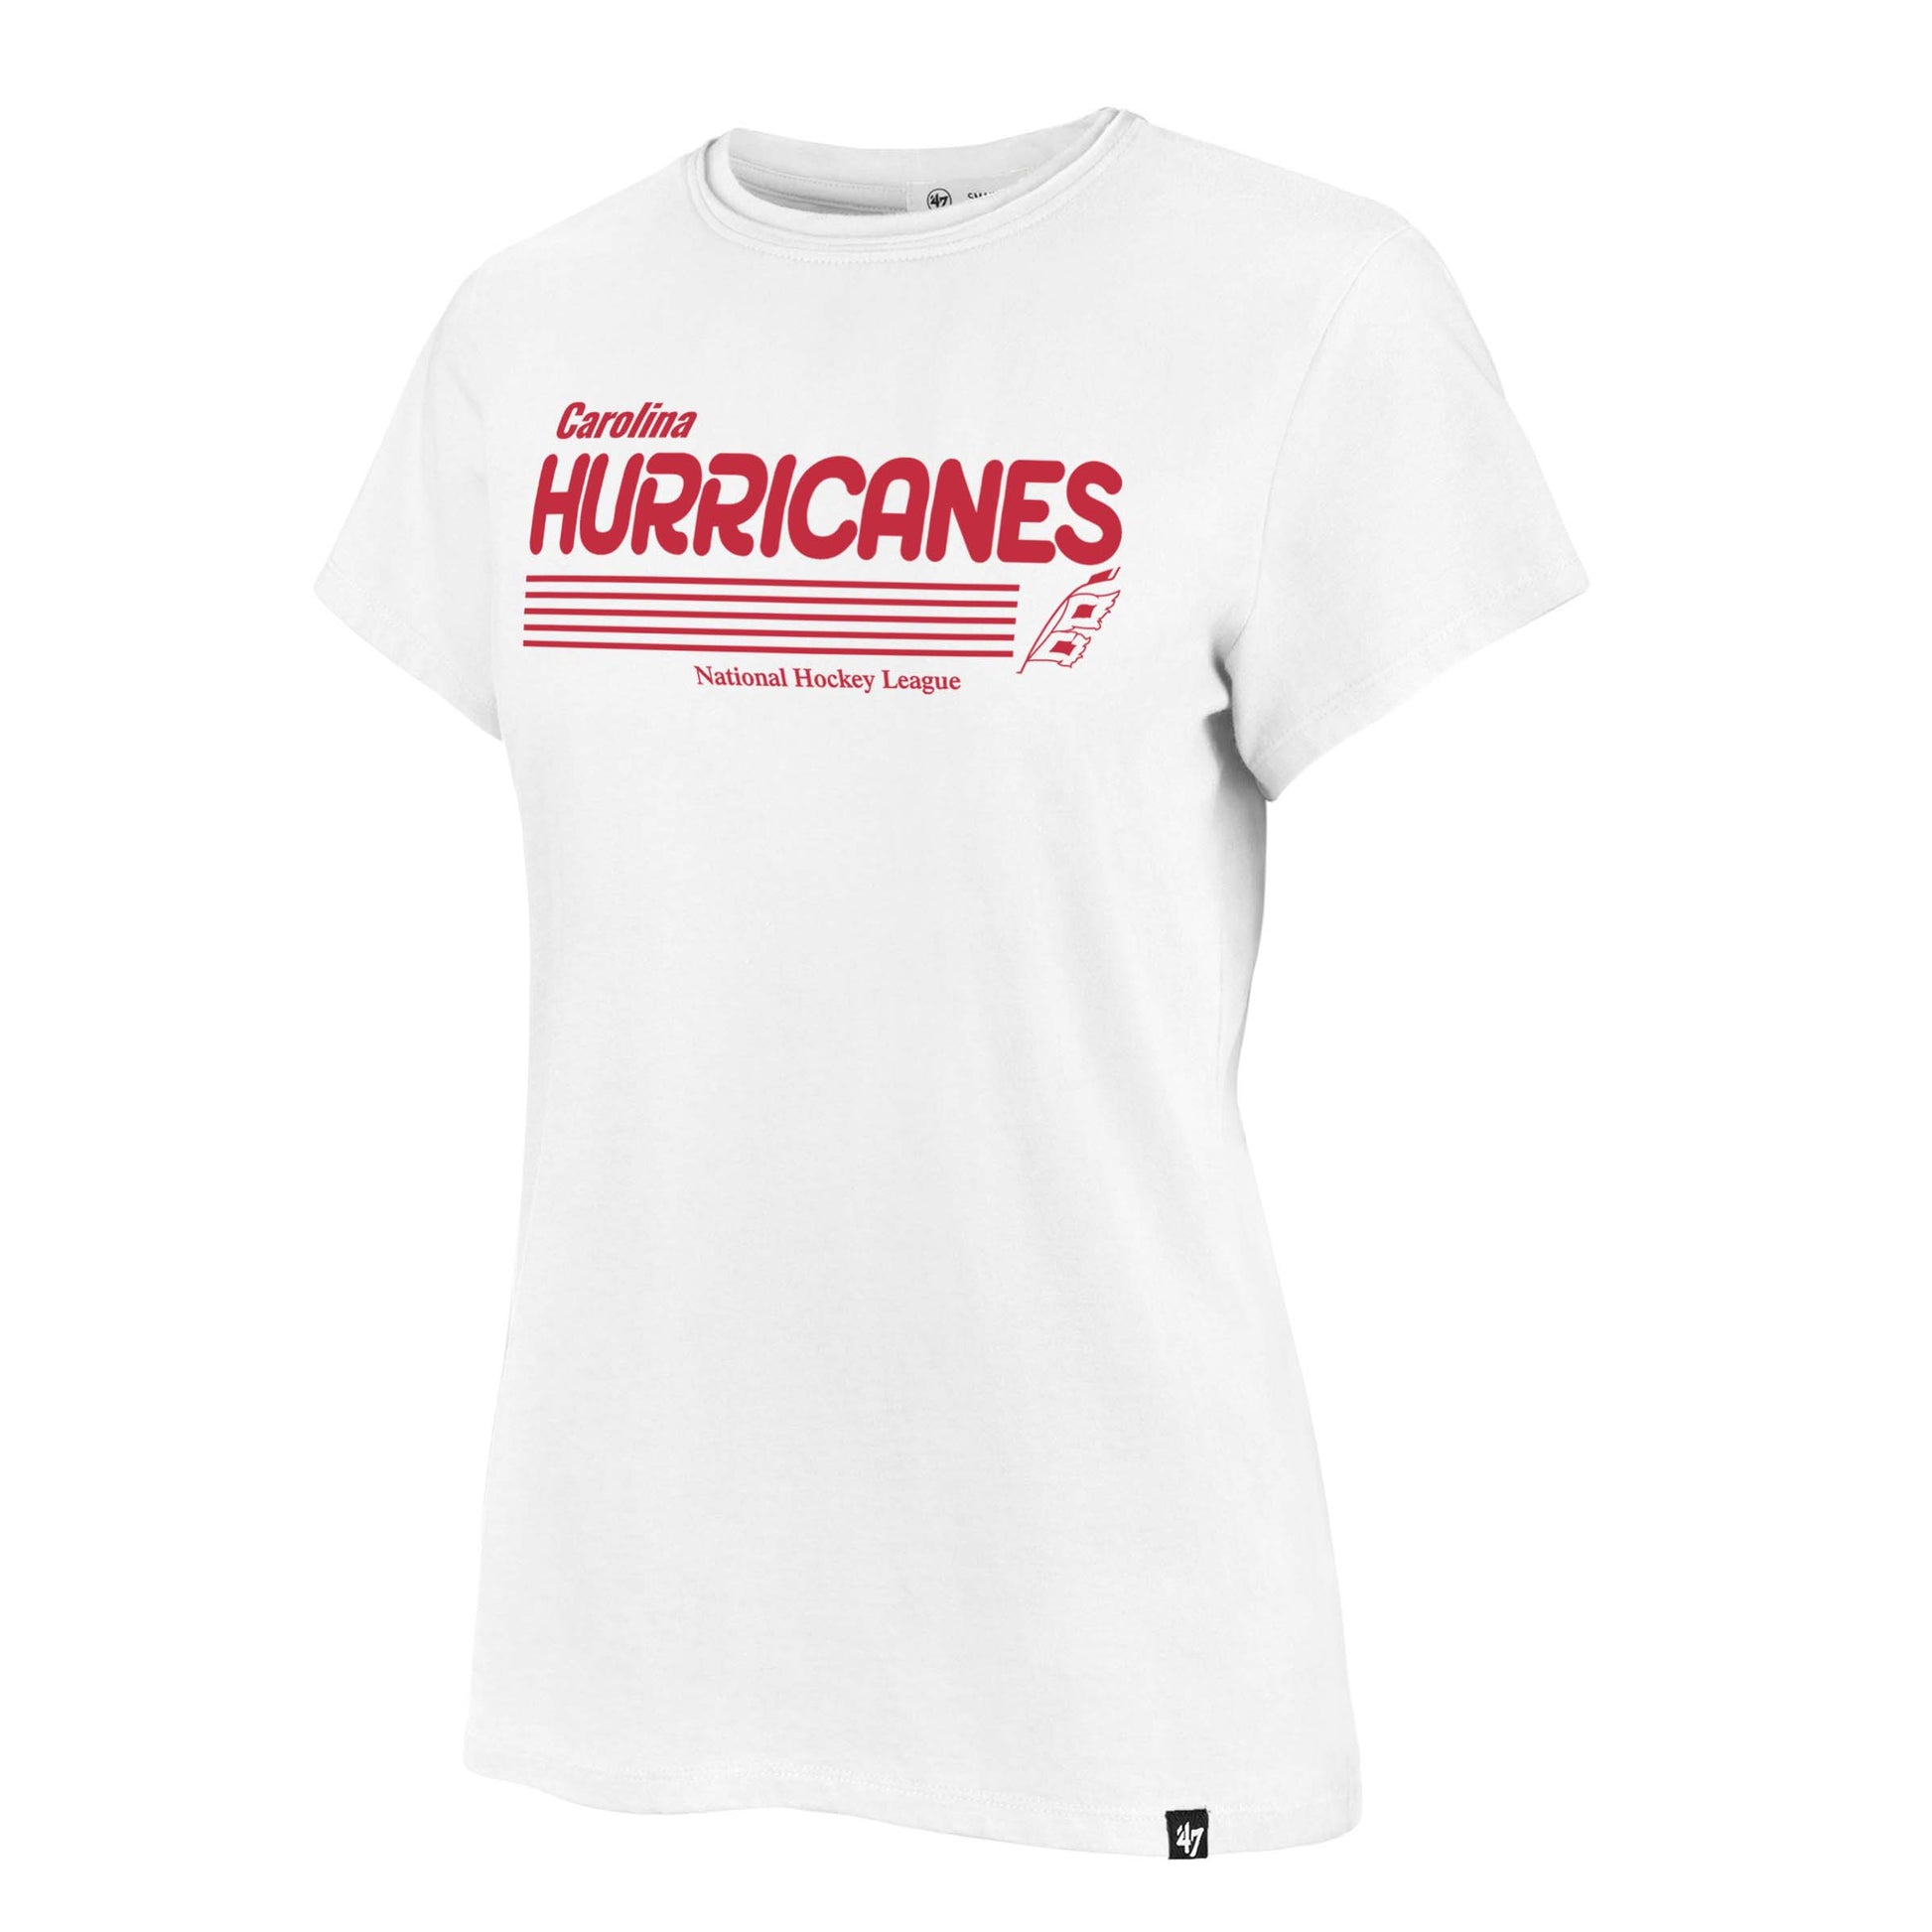 White tee with red graphic saying Carolina Hurricanes National Hockey League with flag logo